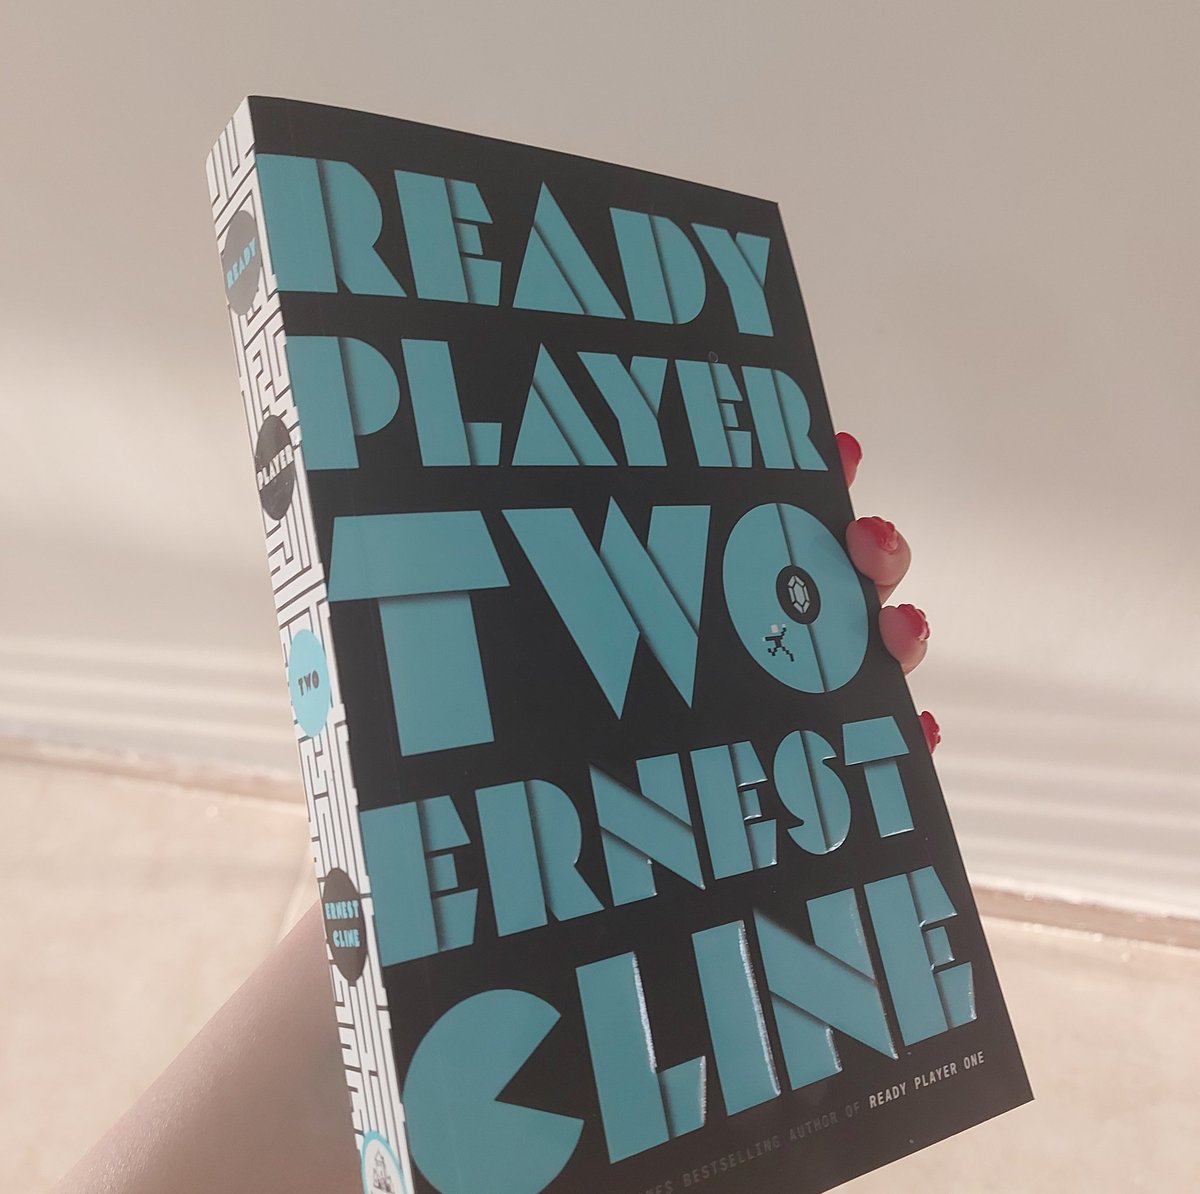 I've started reading Ready player two and it's just not doing it for me!!! It's annoying cuz i really loved the first book; it was actually in my top 5 https://t.co/LToQkc9jZJ